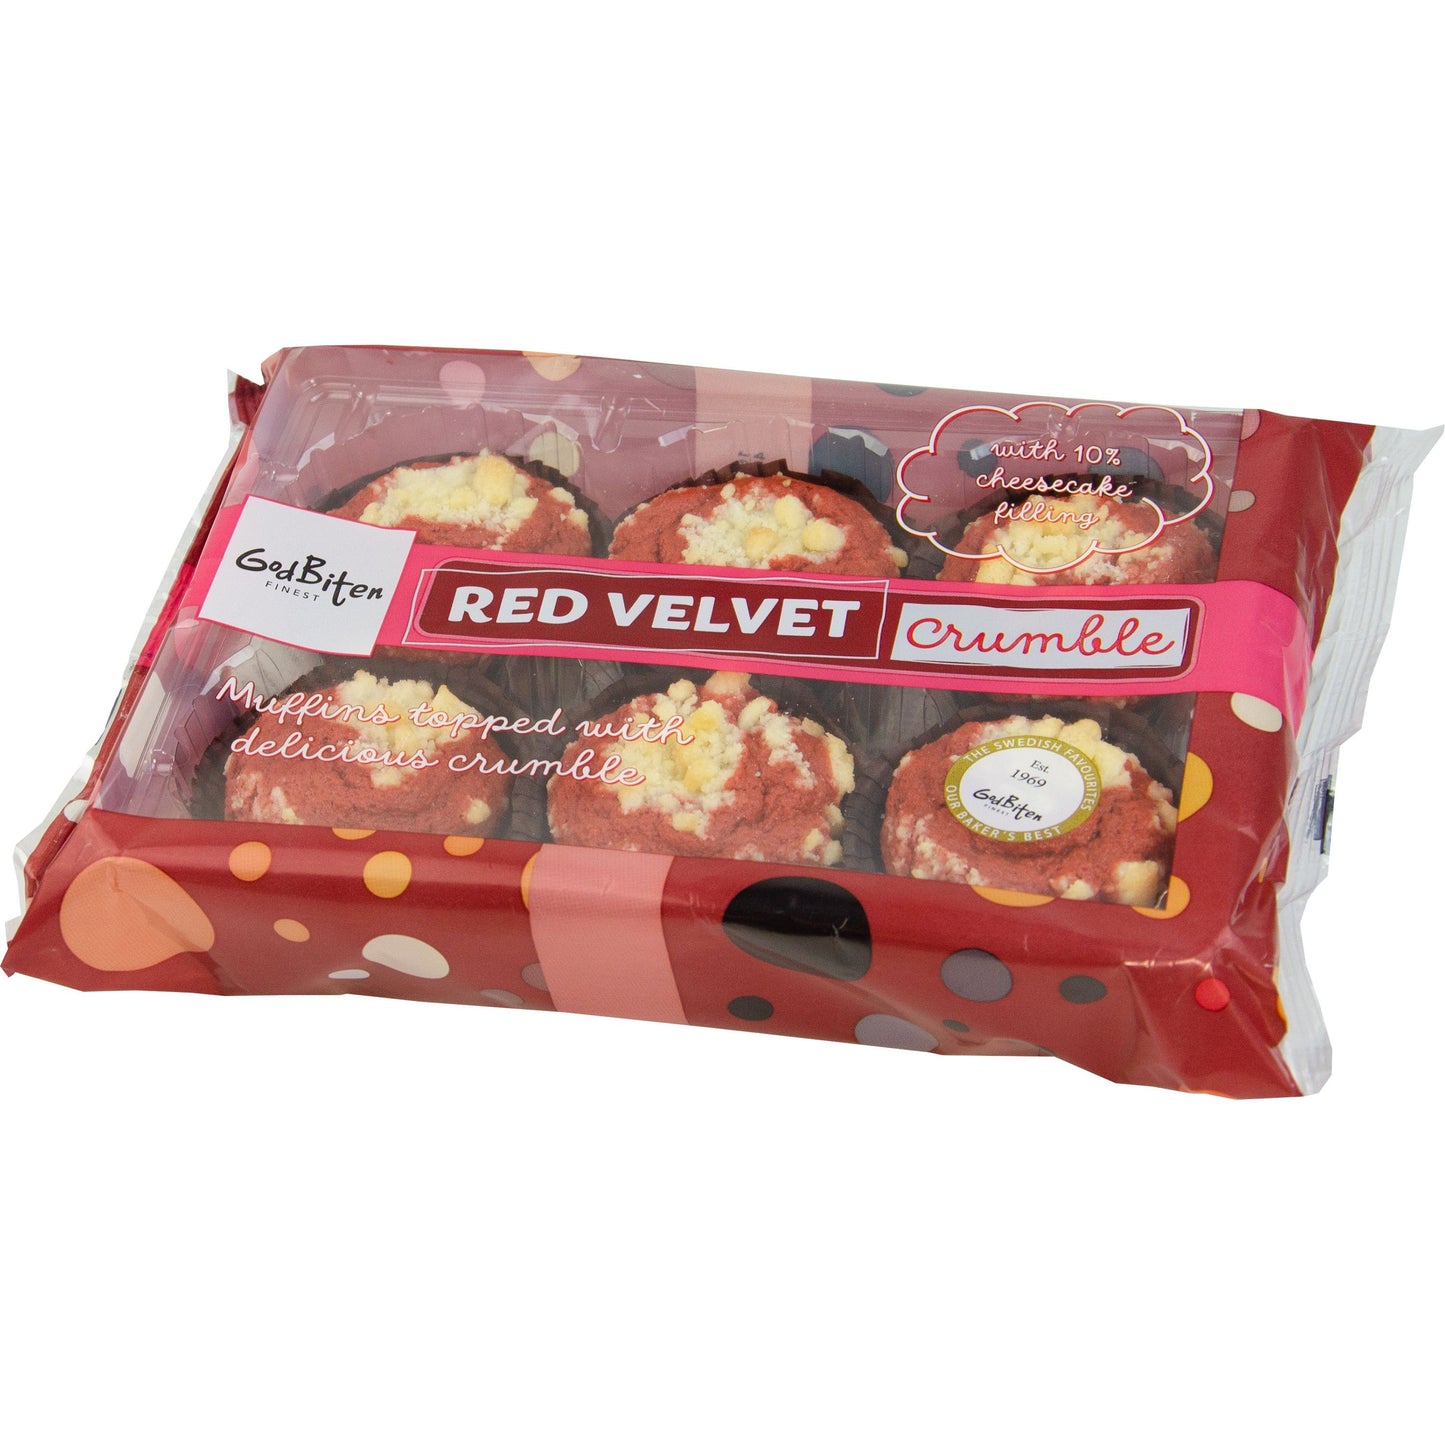 CABICO Red Velvet Crumble Muffins                 8x270g